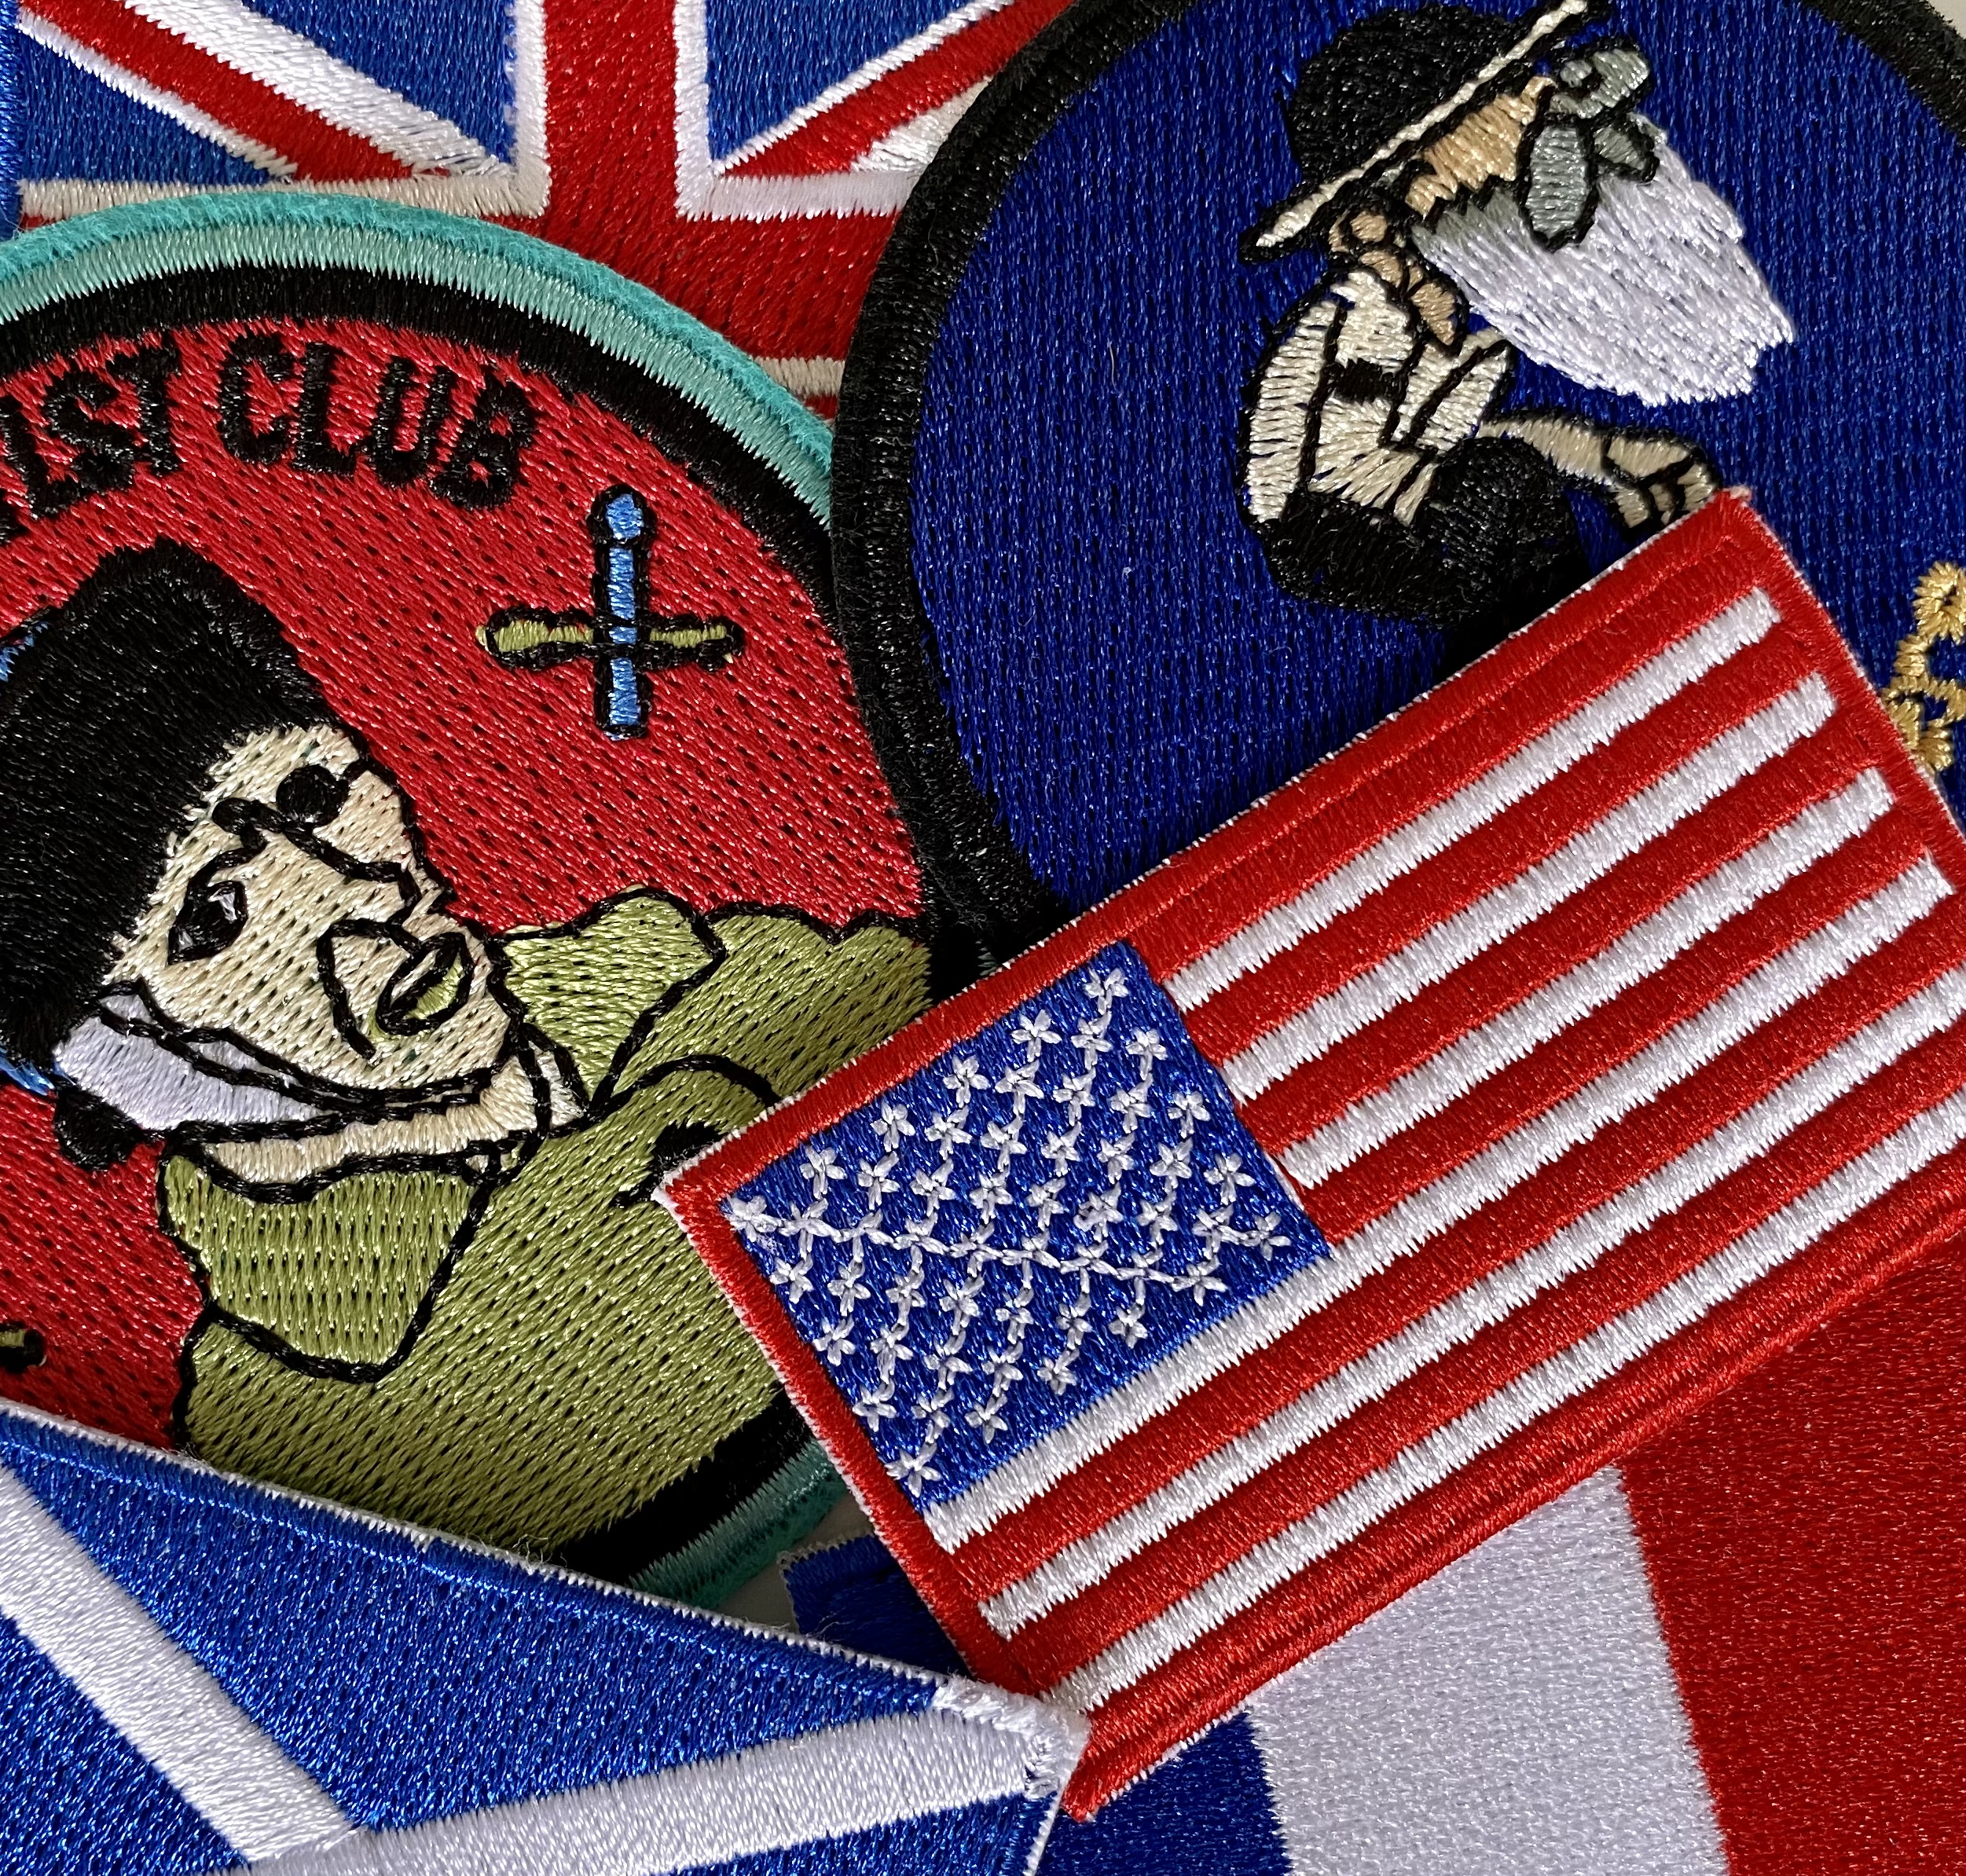 example of flags and patches